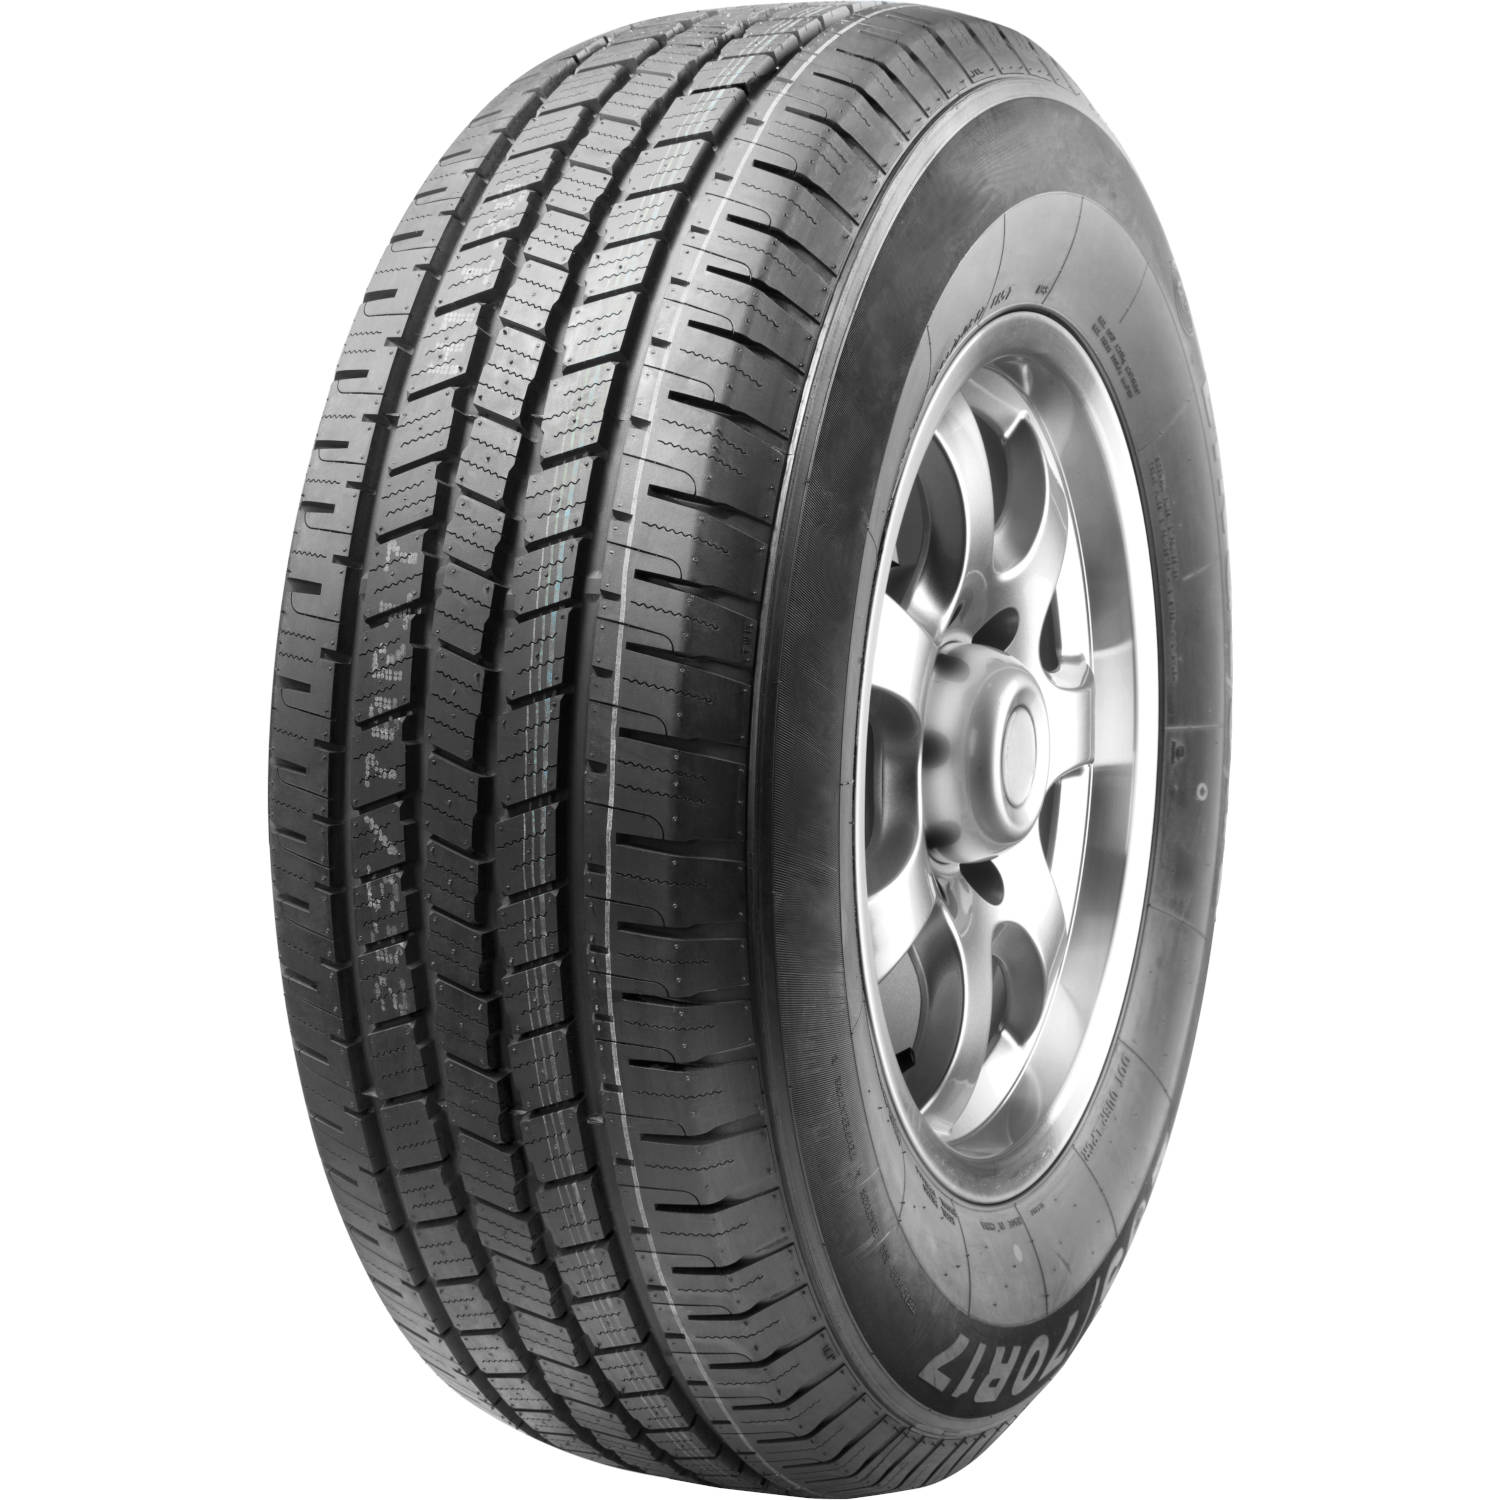 ROAD ONE CAVALRY H/T 245/70R16 (29.5X9.7R 16) Tires